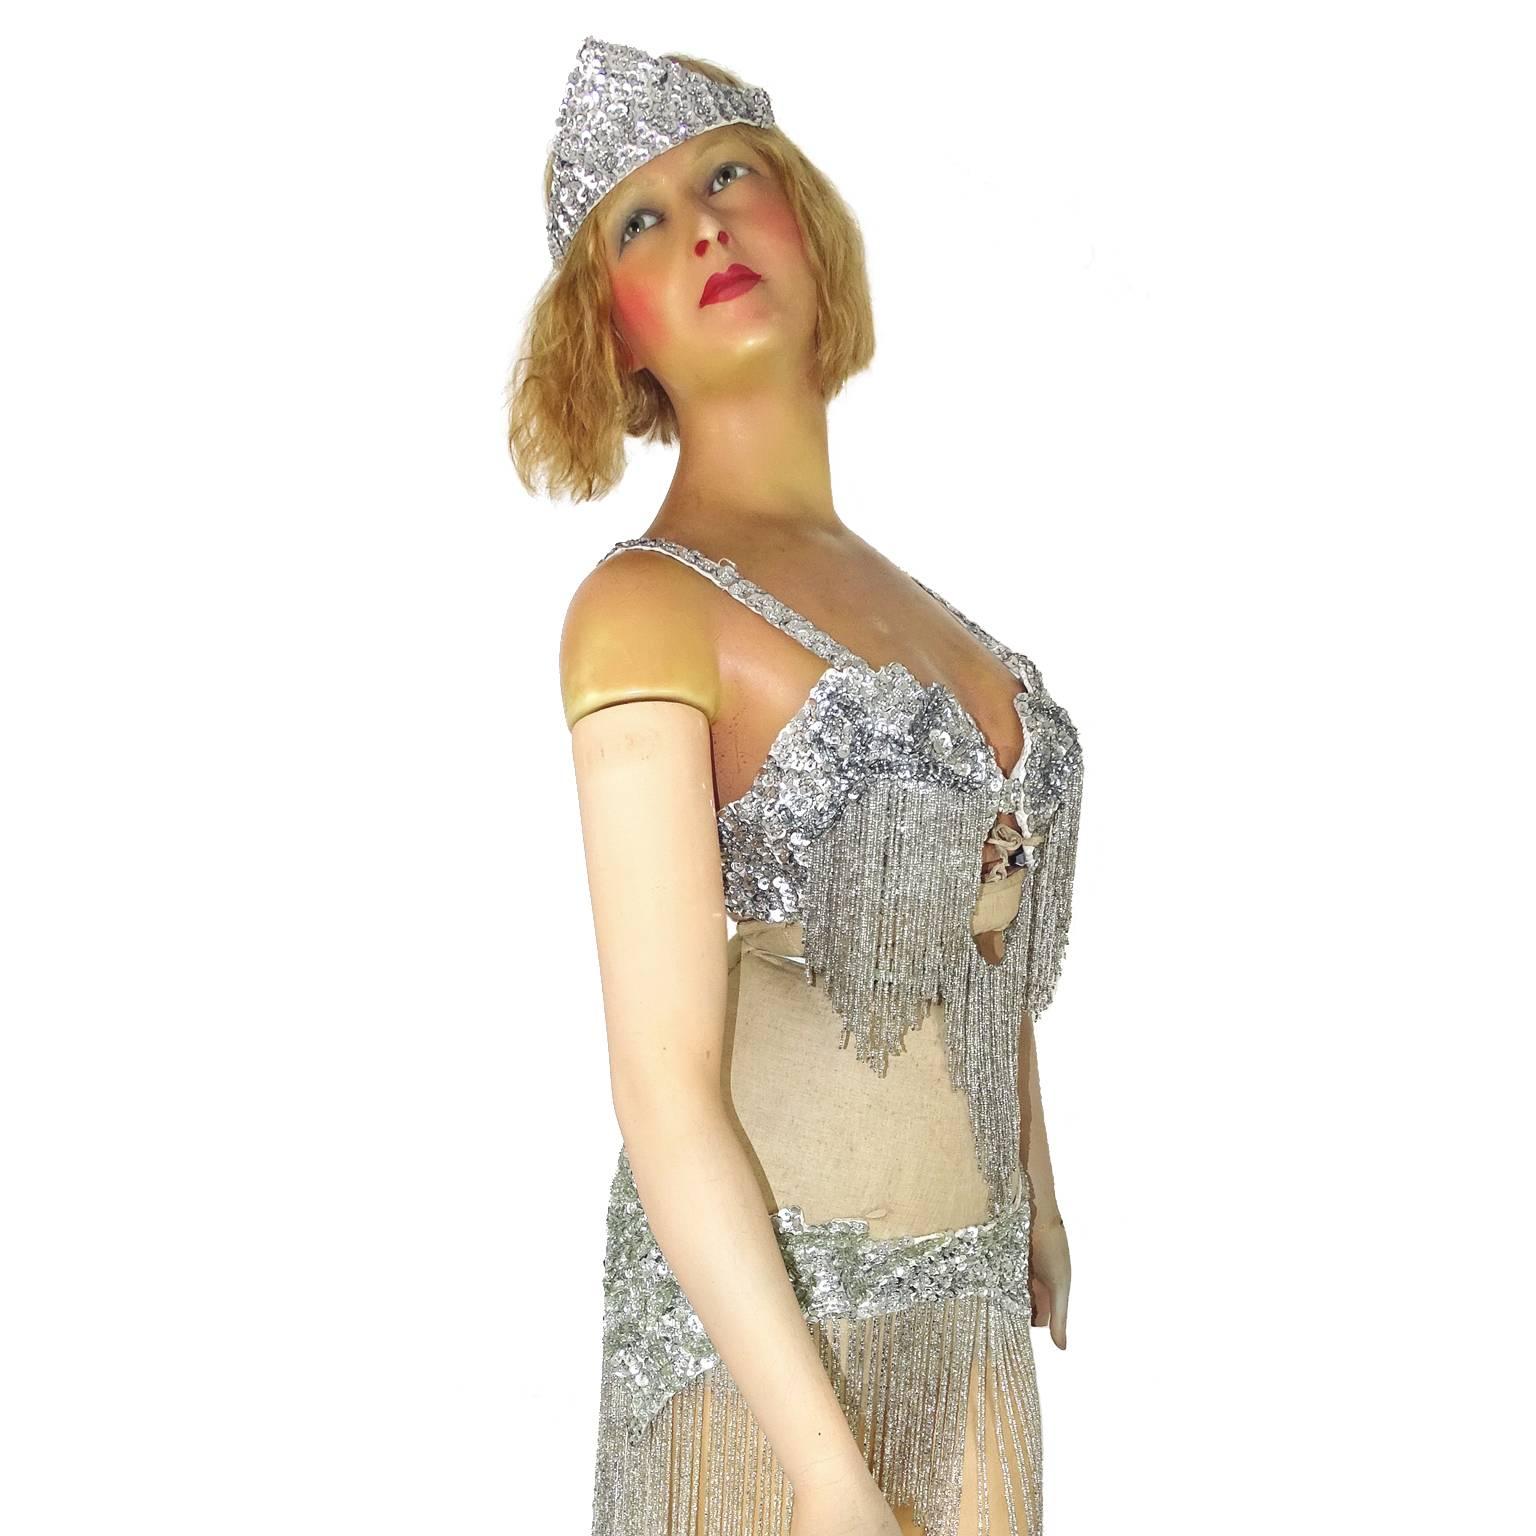 1910 French P. Imans Full-Size Wax Mannequin Bust Doll For Sale 1